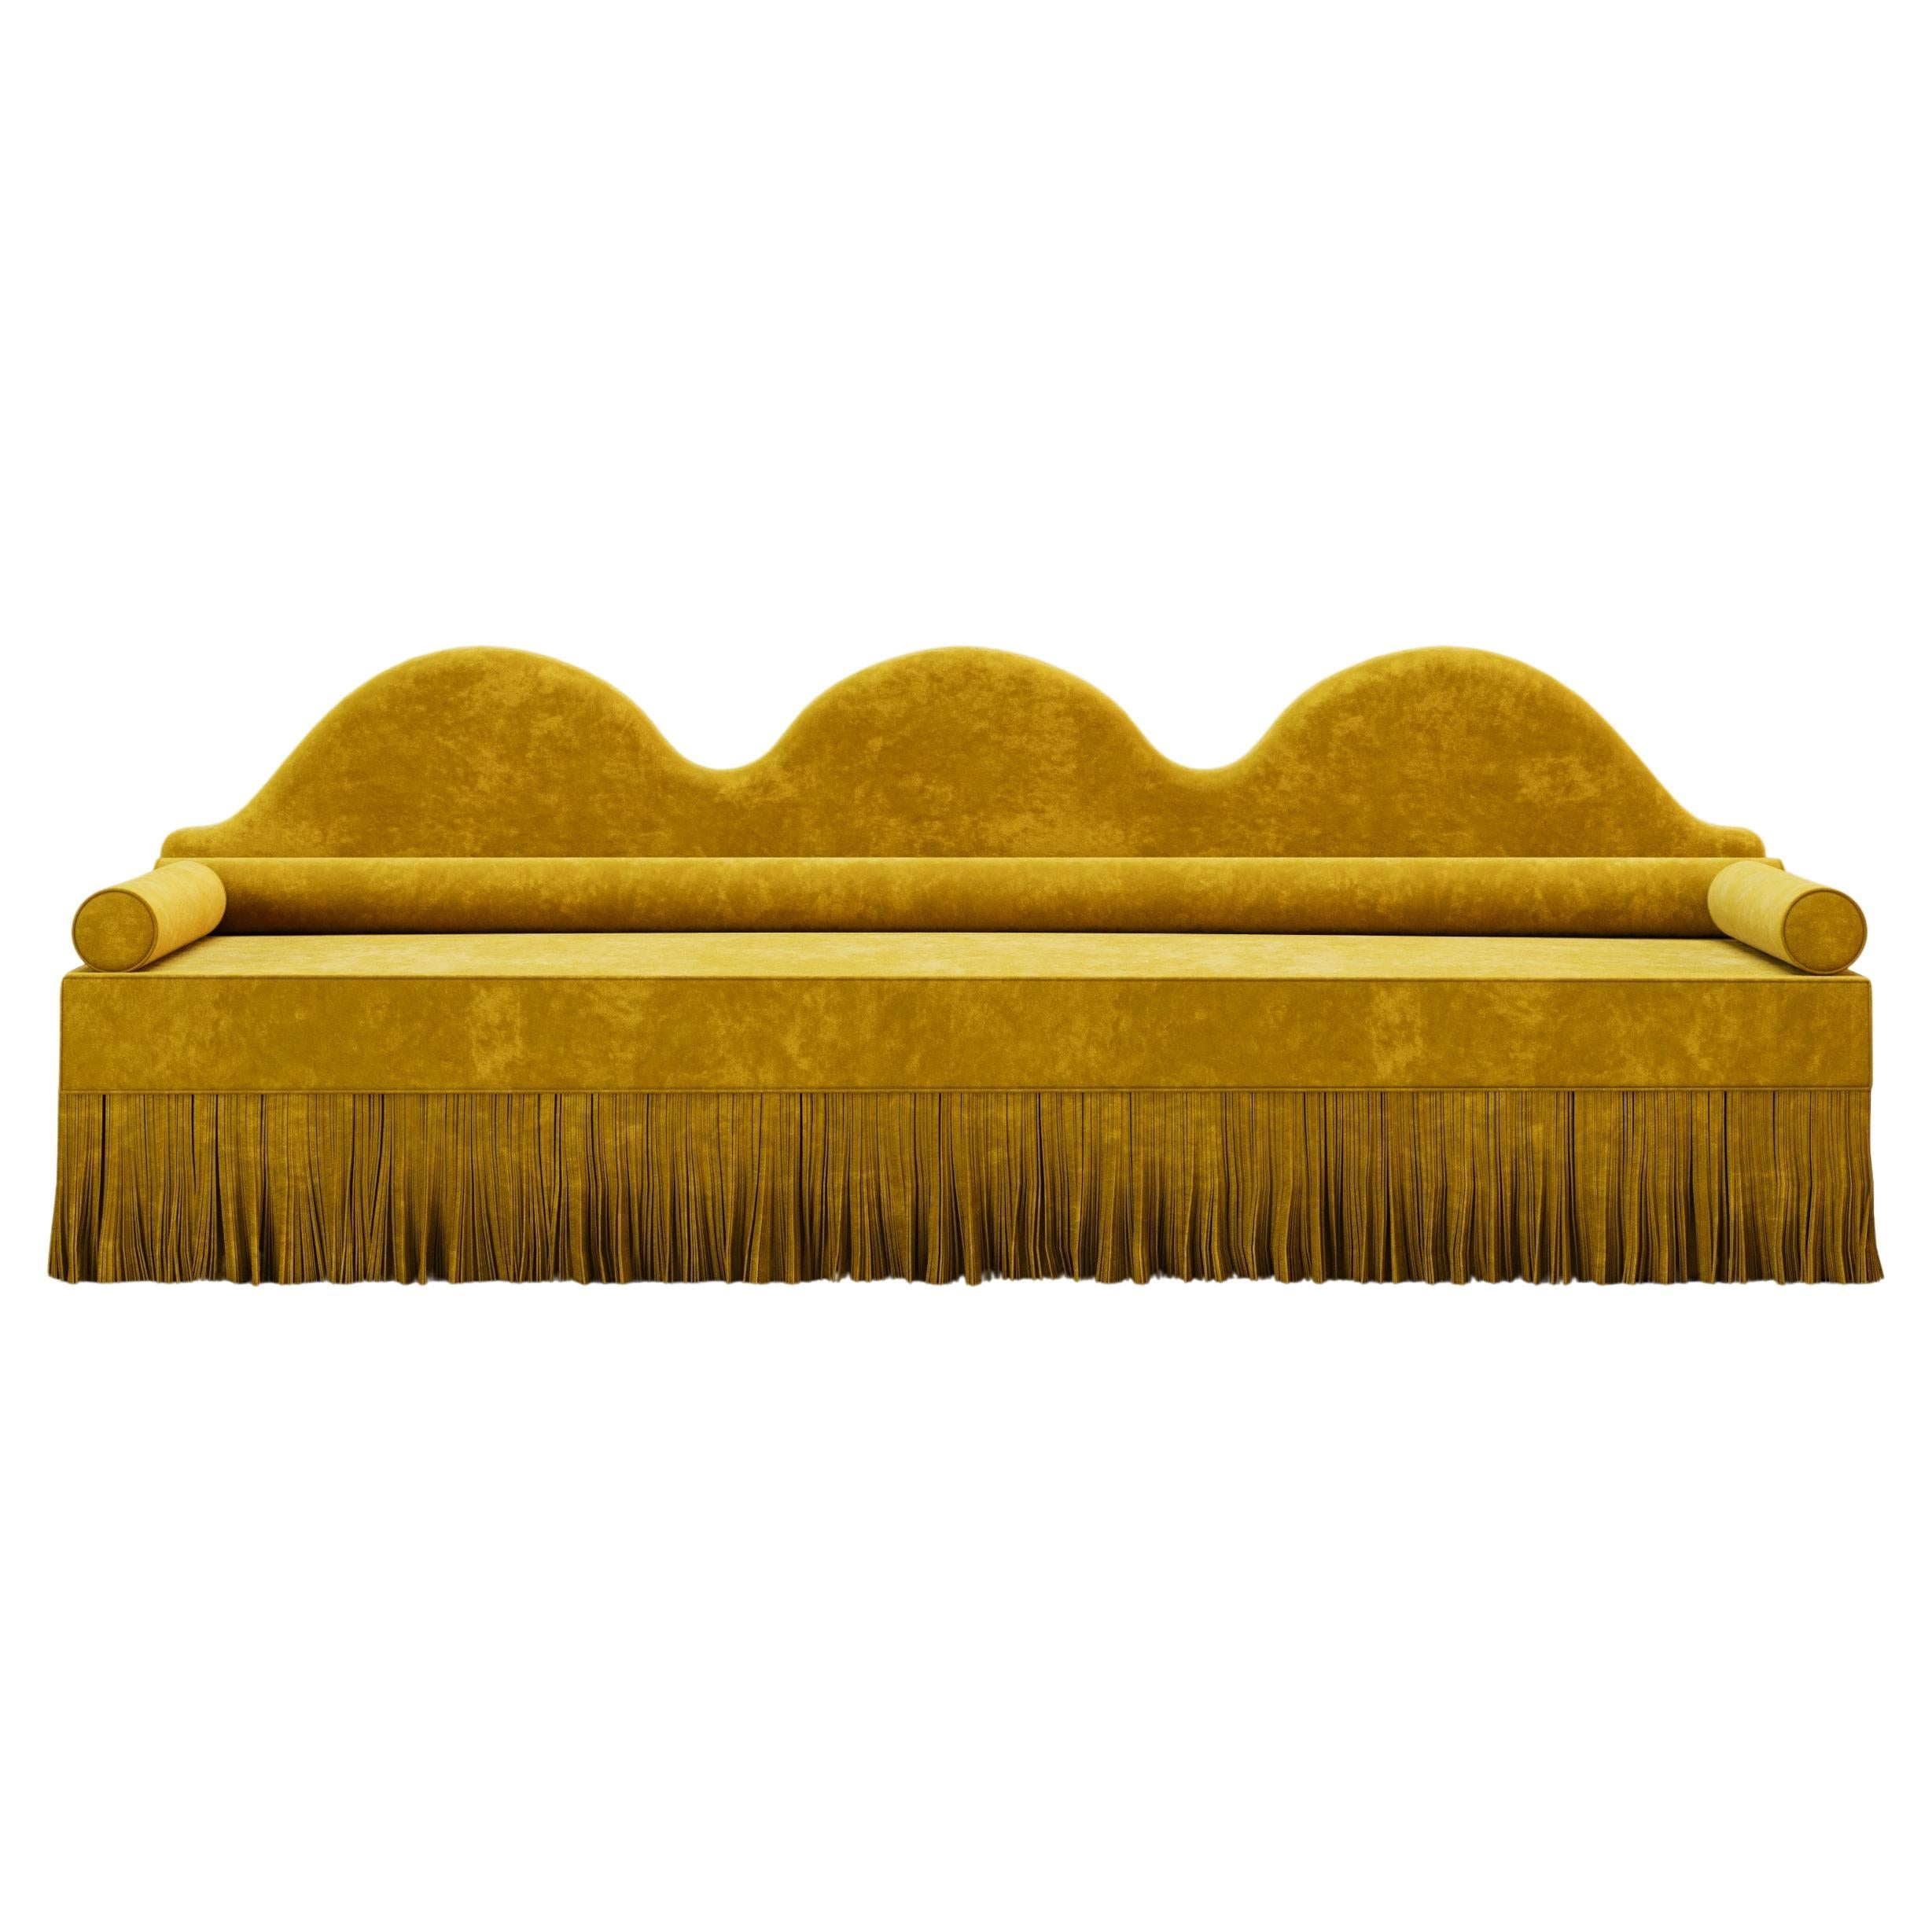 L'INTEMPOREL Sofa in Yellow by Alexandre Ligios, REP by Tuleste Factory For Sale